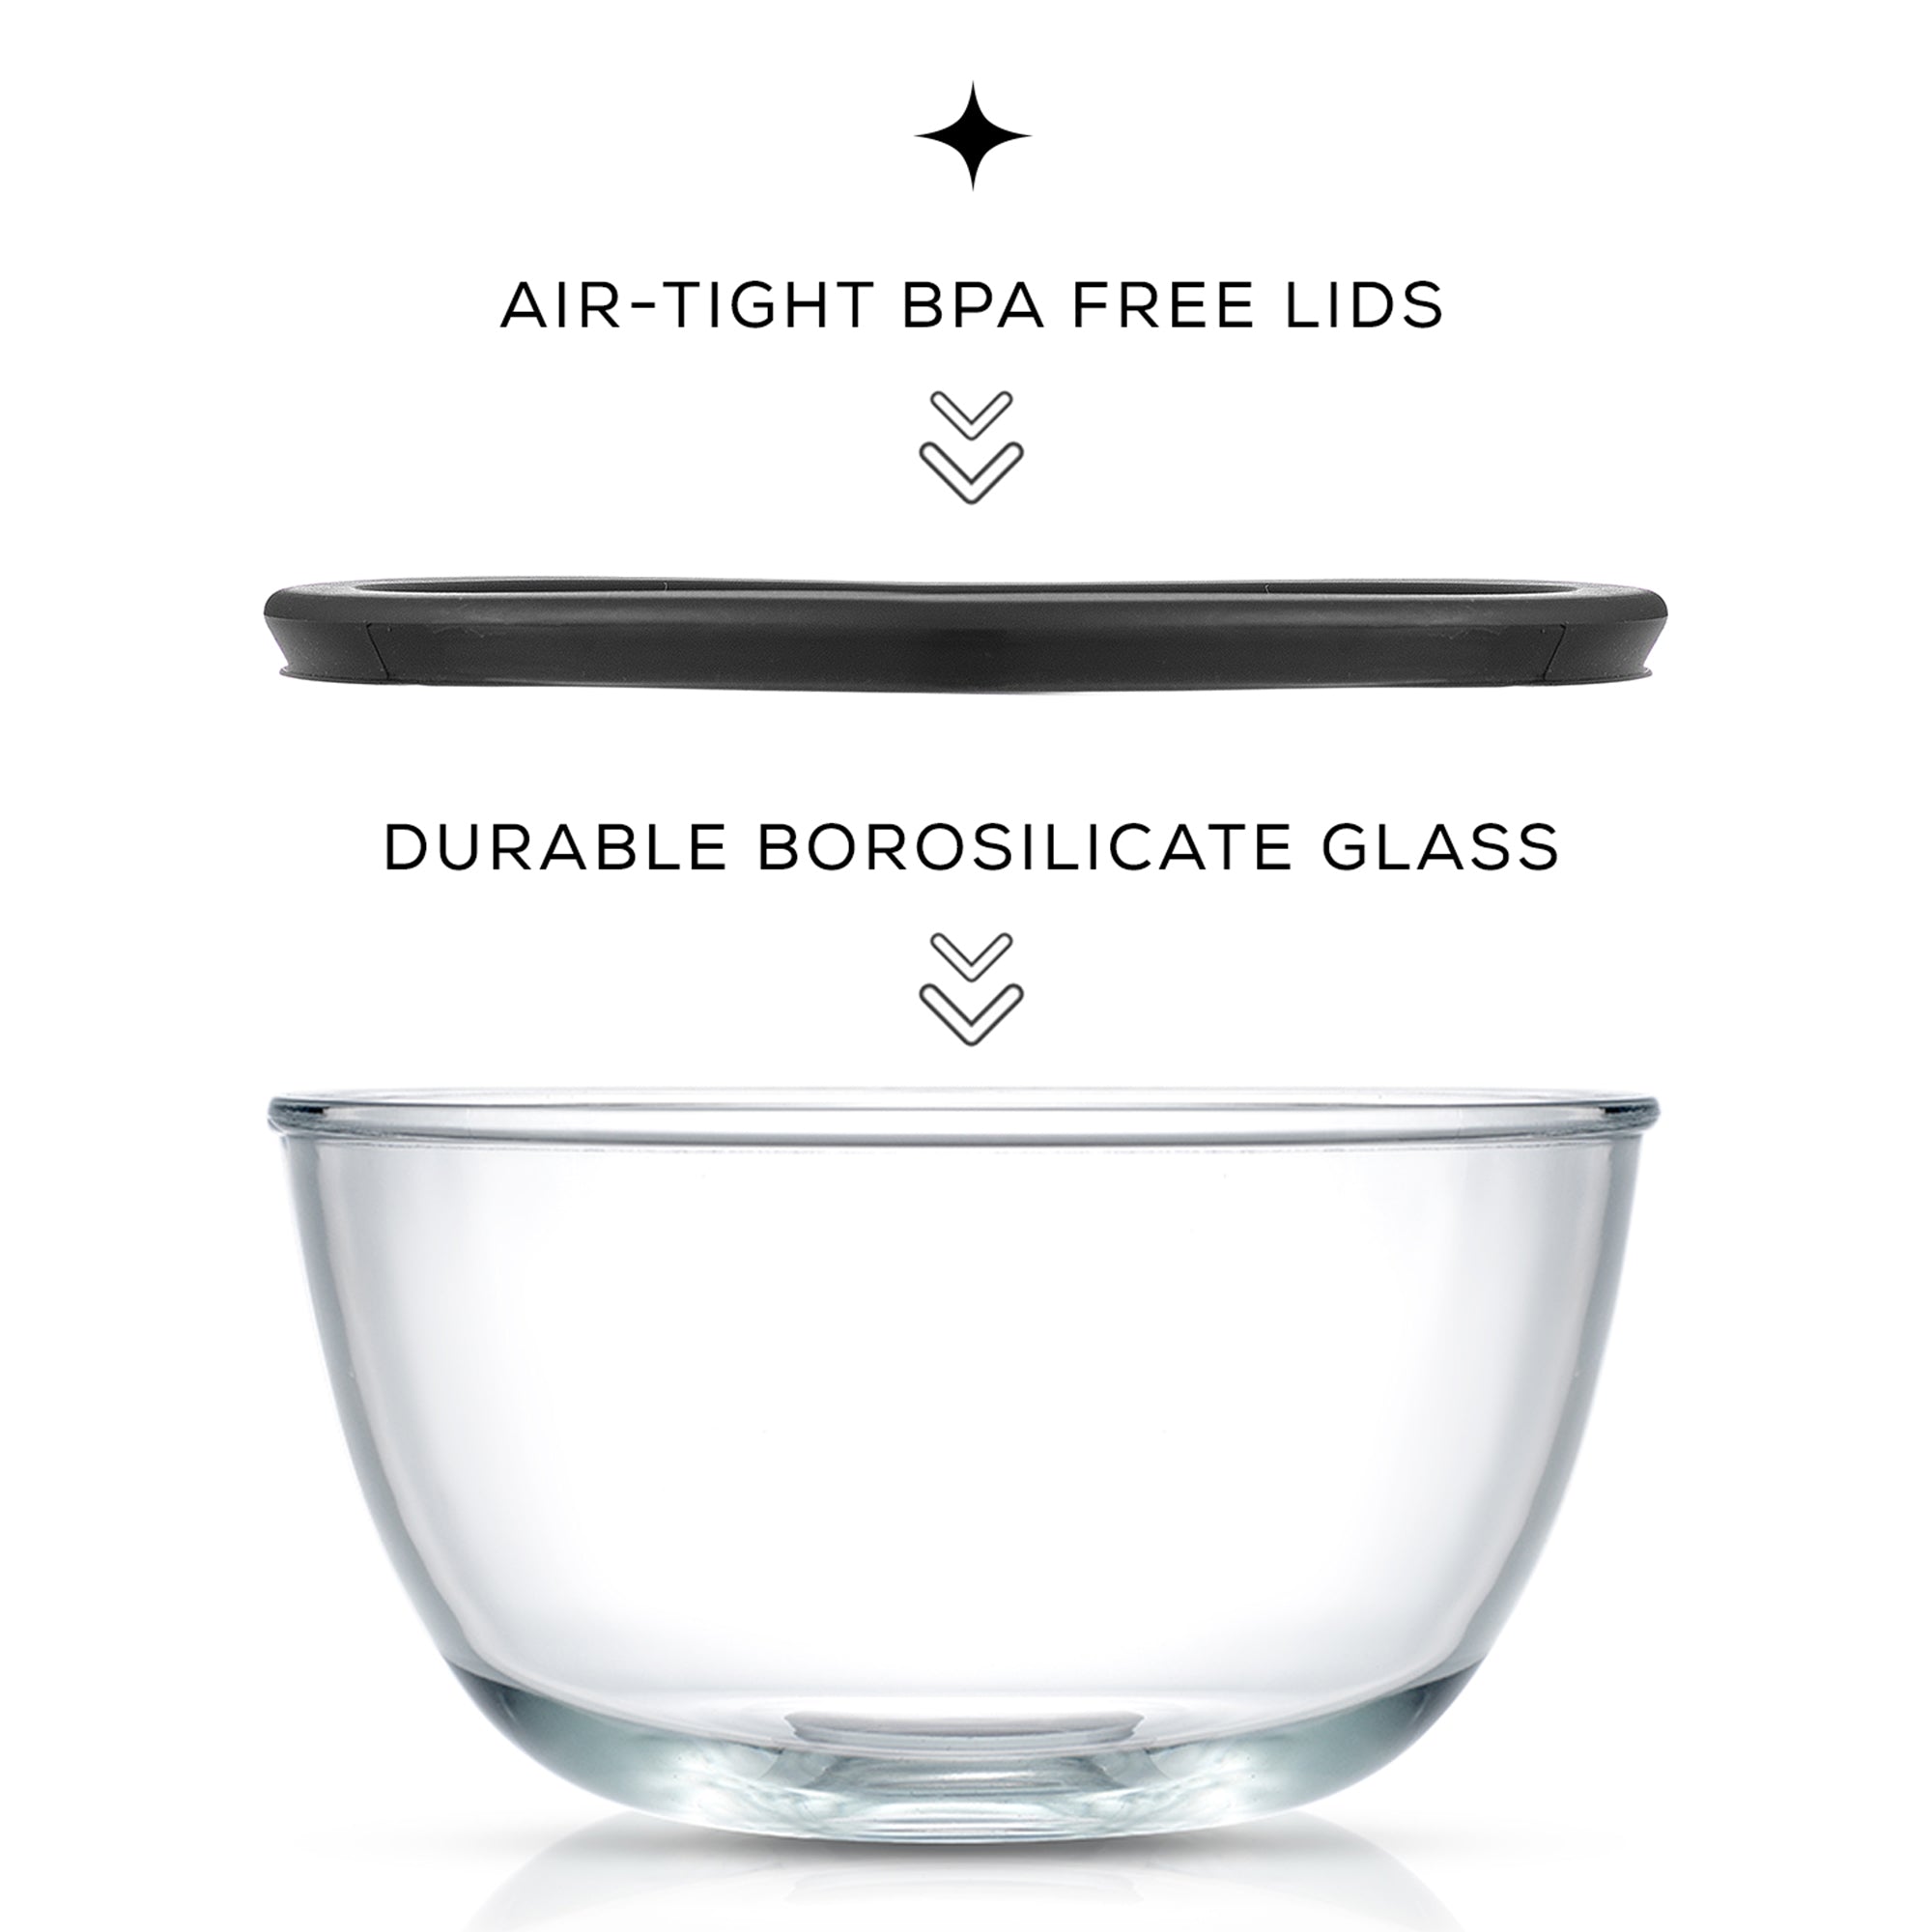 A clear glass bowl with a black lid sits on a white background. Text above the bowl reads "AIR-TIGHT BPA FREE LIDS" and "DURABLE BOROSILICATE GLASS". The lid is not attached to the bowl. 